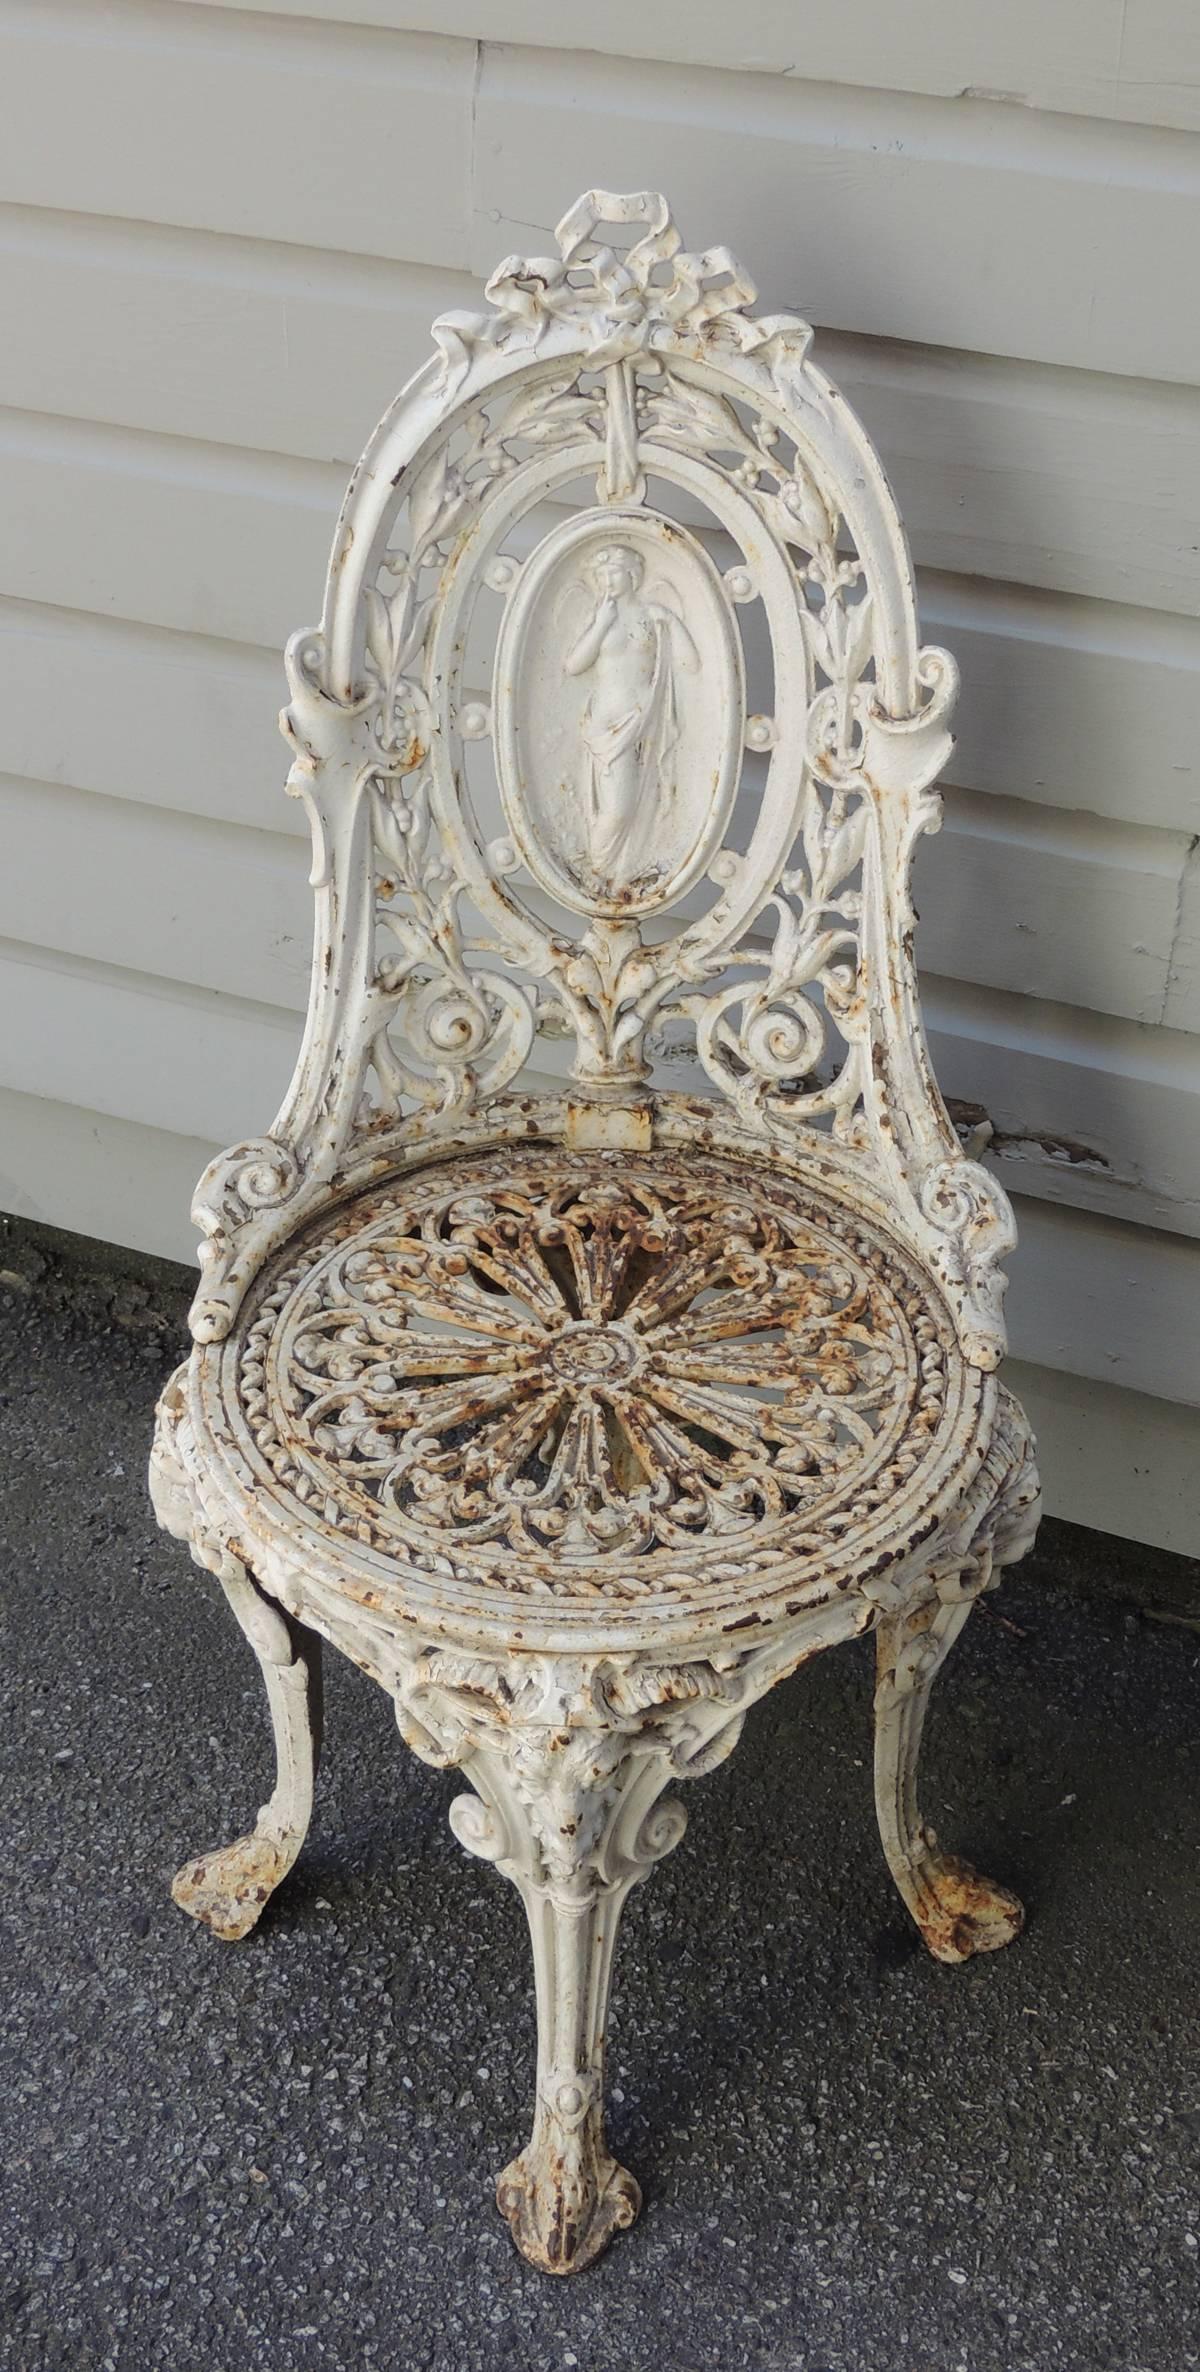 This English pair of garden chairs are made of cast iron and feature classical Greek figures surrounded with scroll designs and ribbon motifs. The seats are decorated with pierced design and the chairs four legs each feature a ram's heads motif.